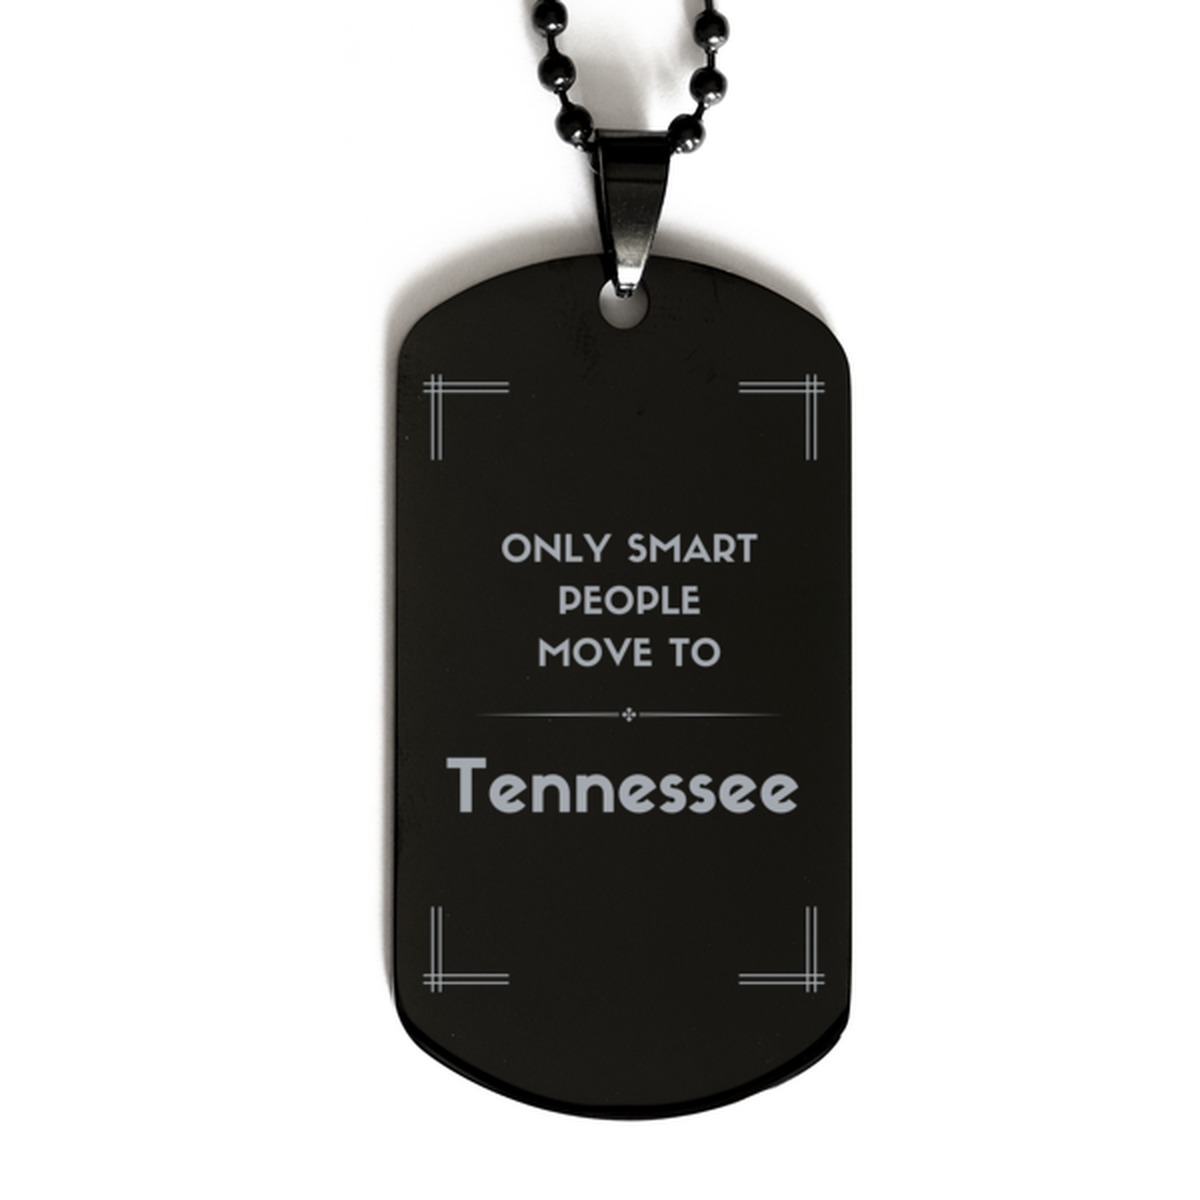 Only smart people move to Tennessee Black Dog Tag, Gag Gifts For Tennessee, Move to Tennessee Gifts for Friends Coworker Funny Saying Quote